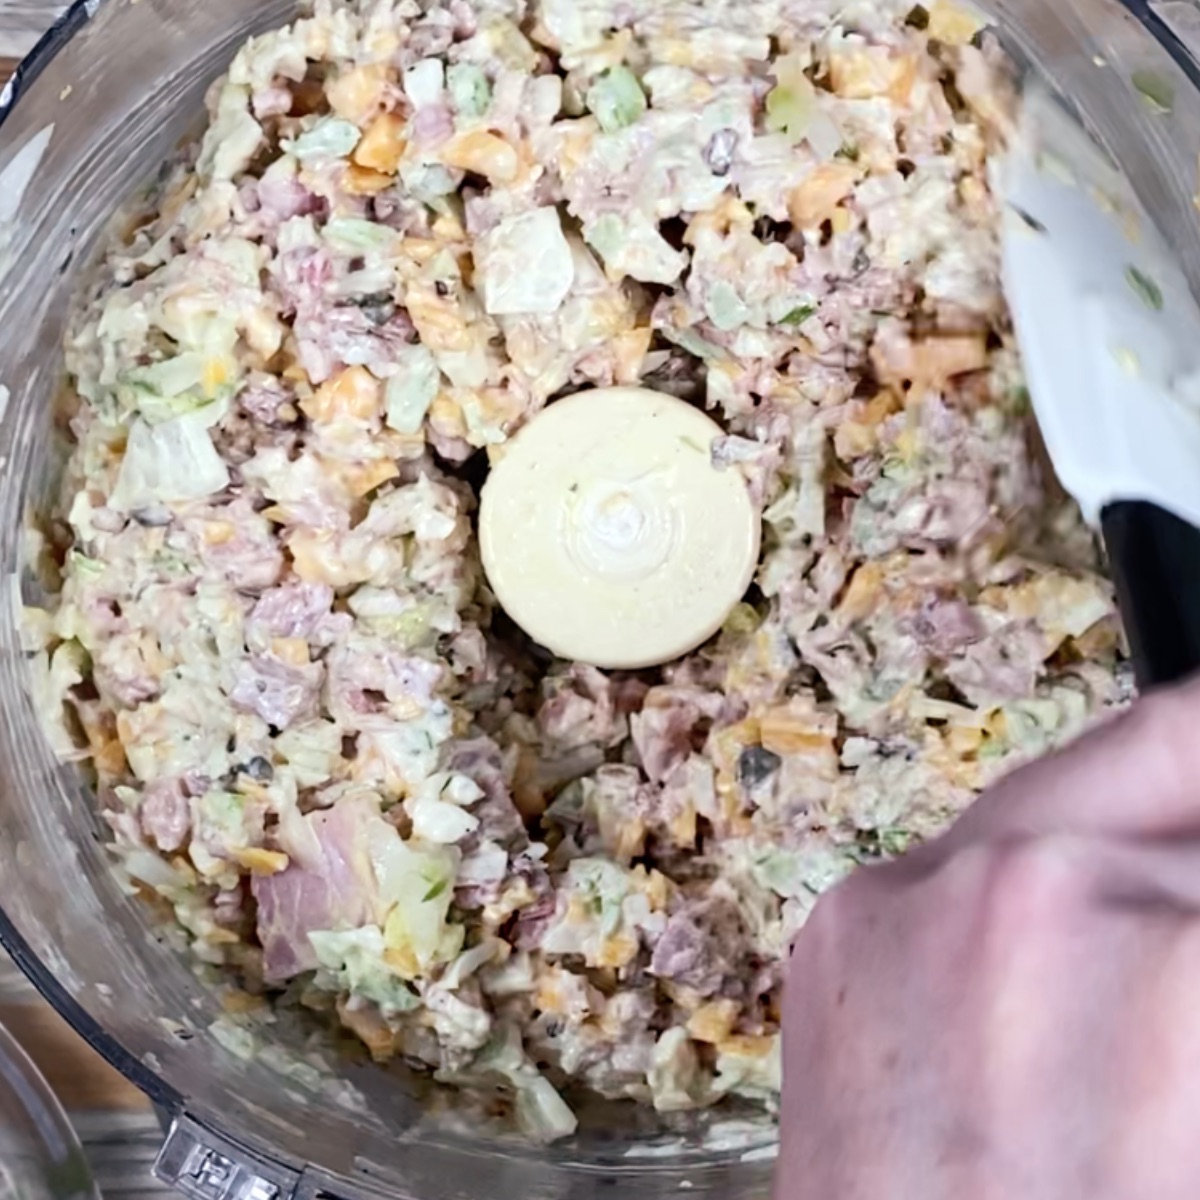 Overhead view showing how to scrape down the sides of the food processor half way through pulsing the ham salad ingredients.